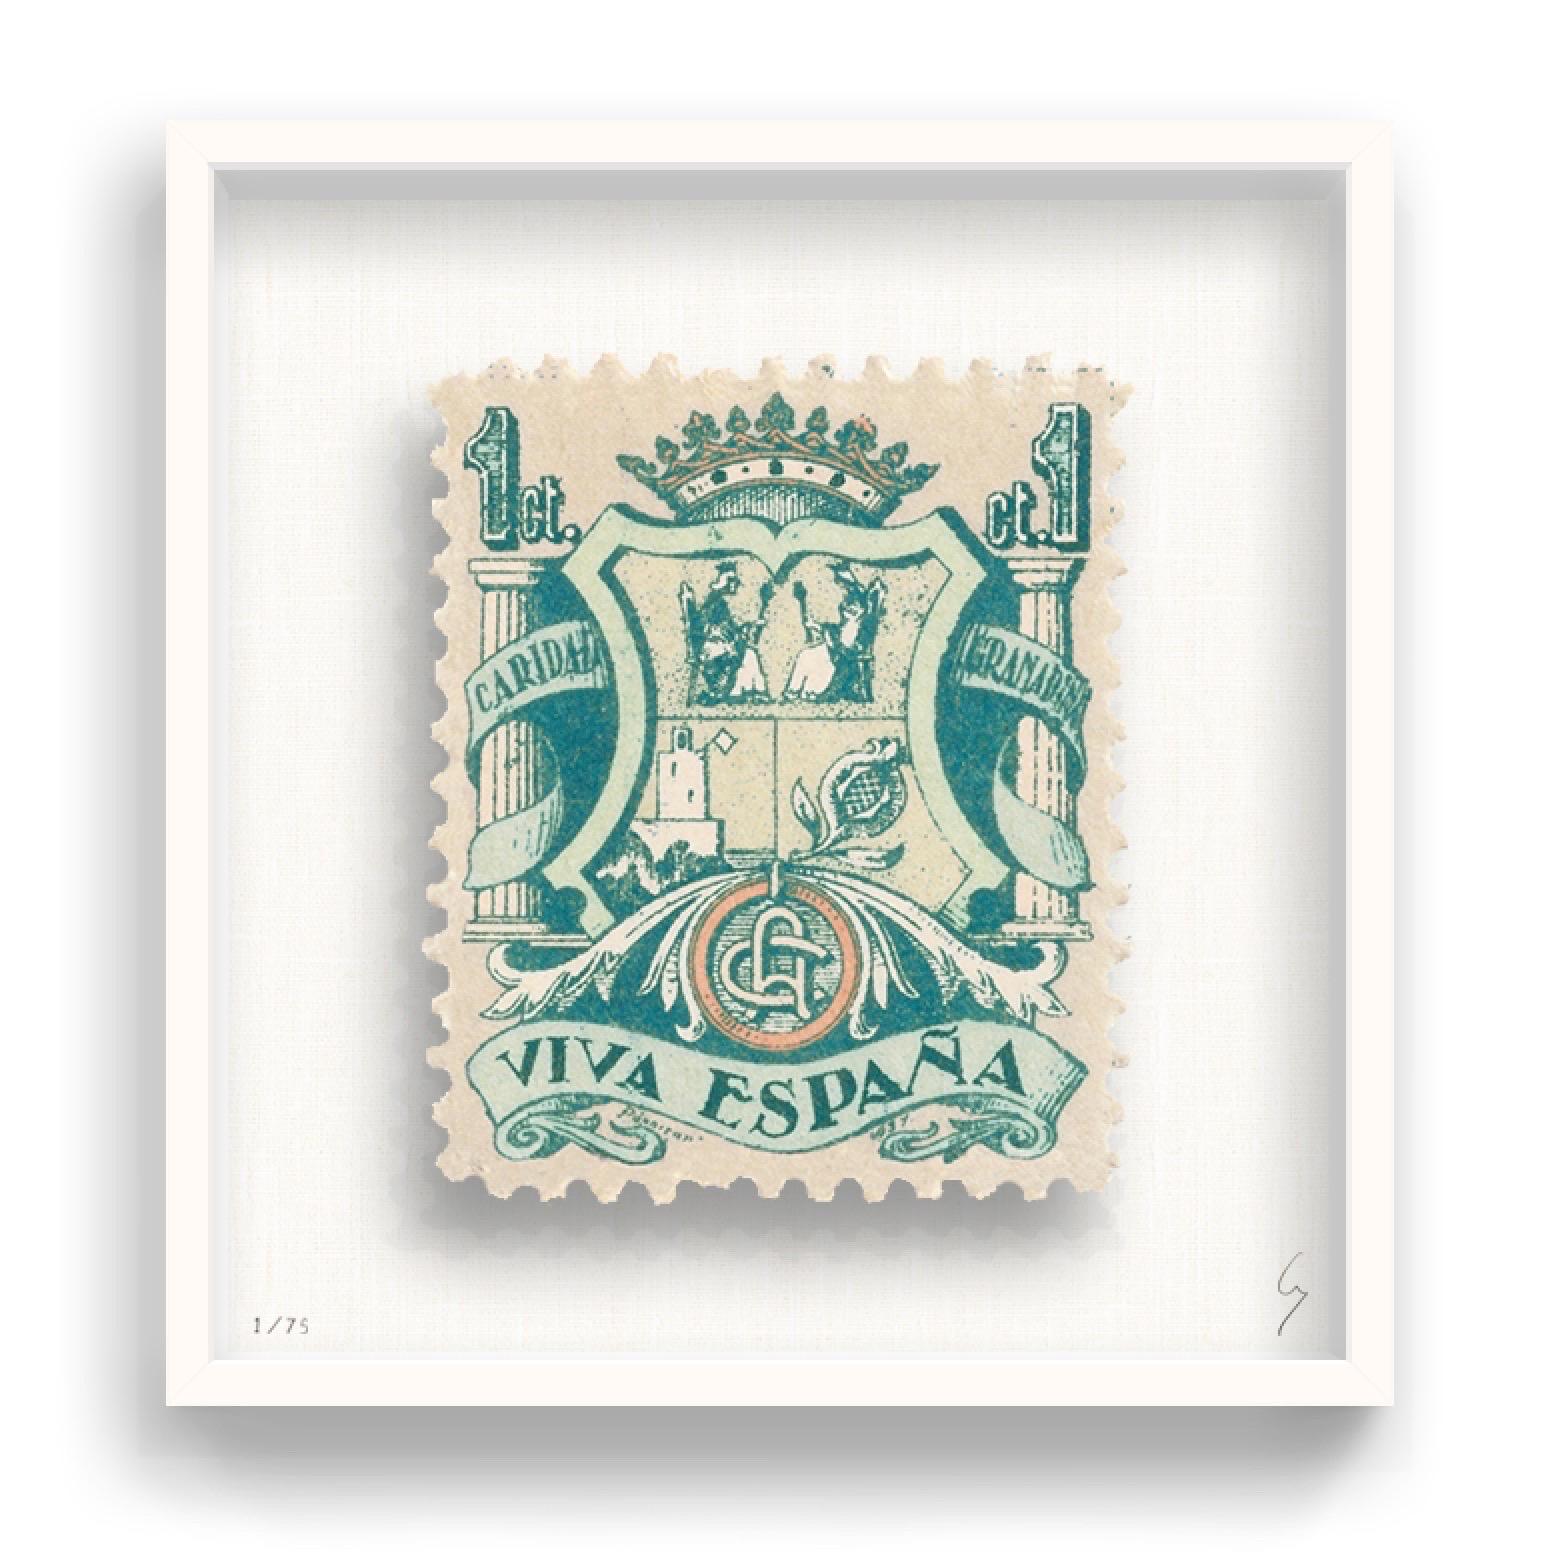 Guy Gee, Spain (medium)

Hand-engraved print on 350gsm on G.F Smith card
31 x 35 cm (12 1/5 x 13 4/5)
Frame included 
Edition of 75 

Each artwork by Guy had been digitally reimagined from an original postage stamp. Cut out and finished by hand, the